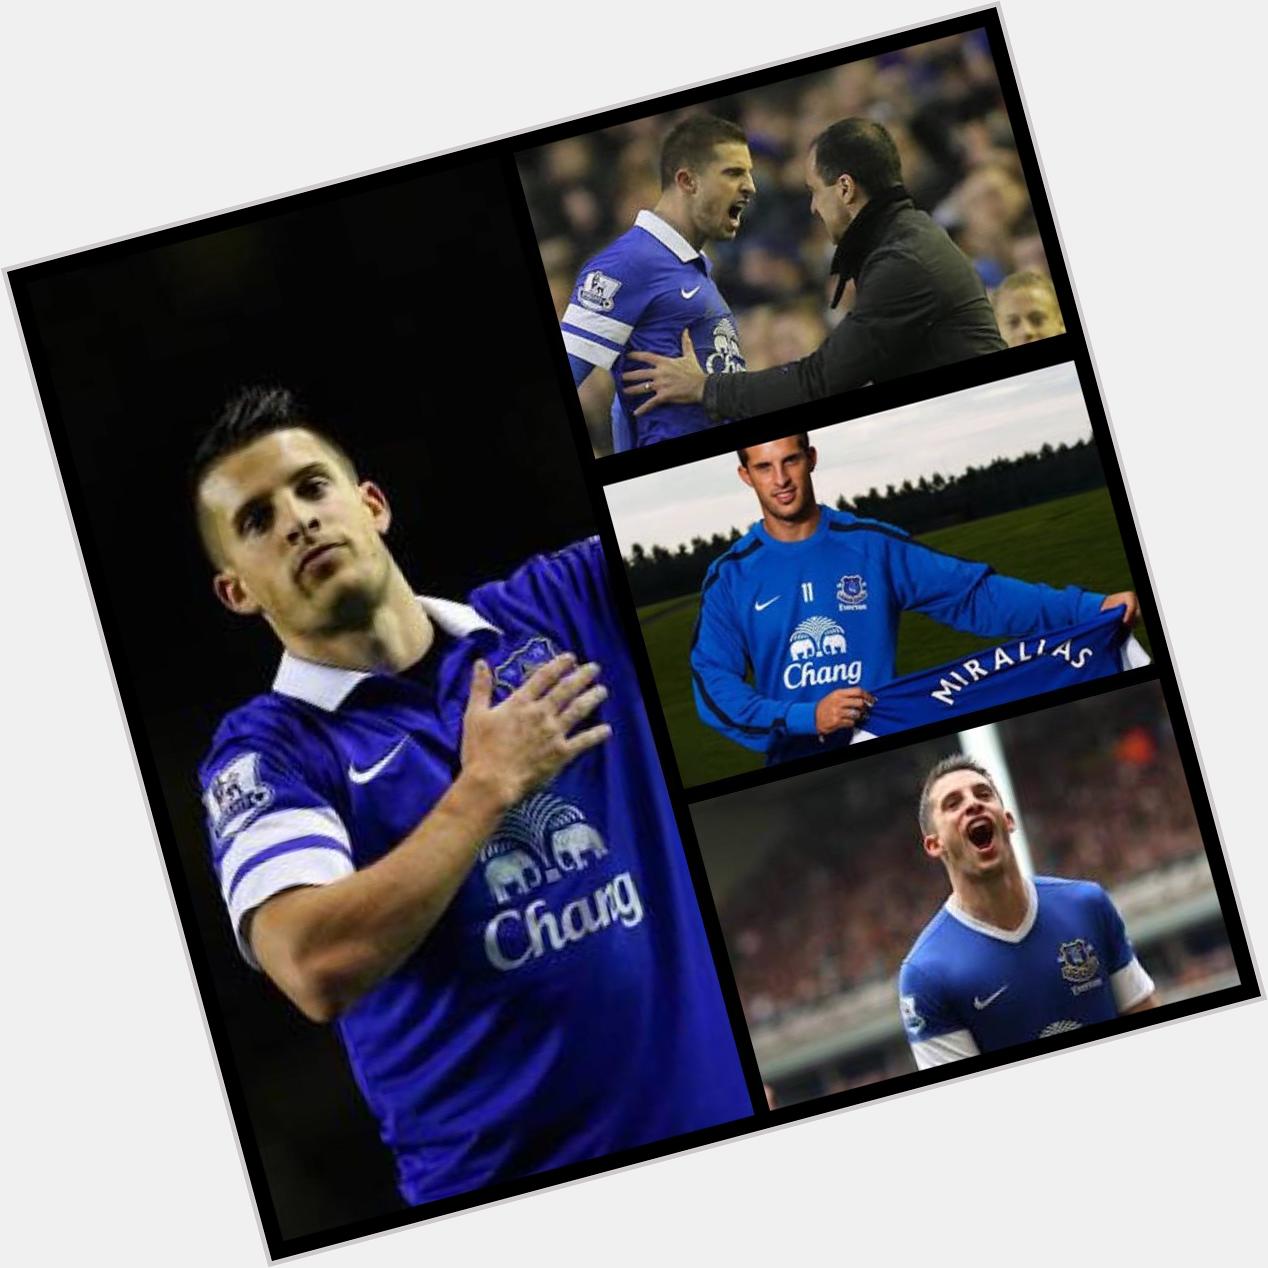 The Evertonians in India would like to wish Kevin Mirallas a very Happy Birthday!   